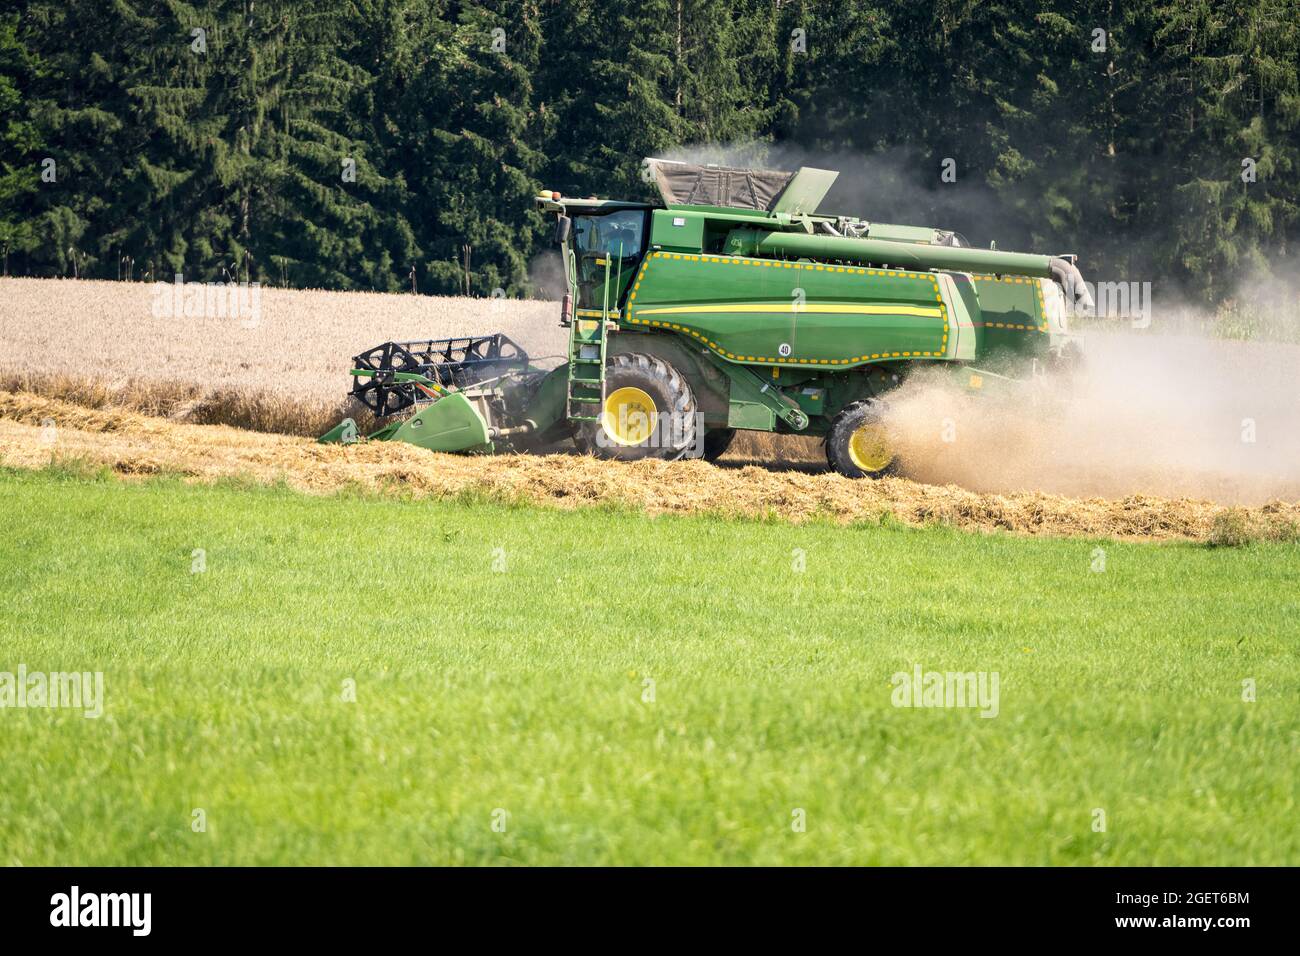 the combine harvester in the field brings in the grain harvest. In midsummer during the wheat harvest it is very dusty. Farmers in Bavaria, Germany Stock Photo